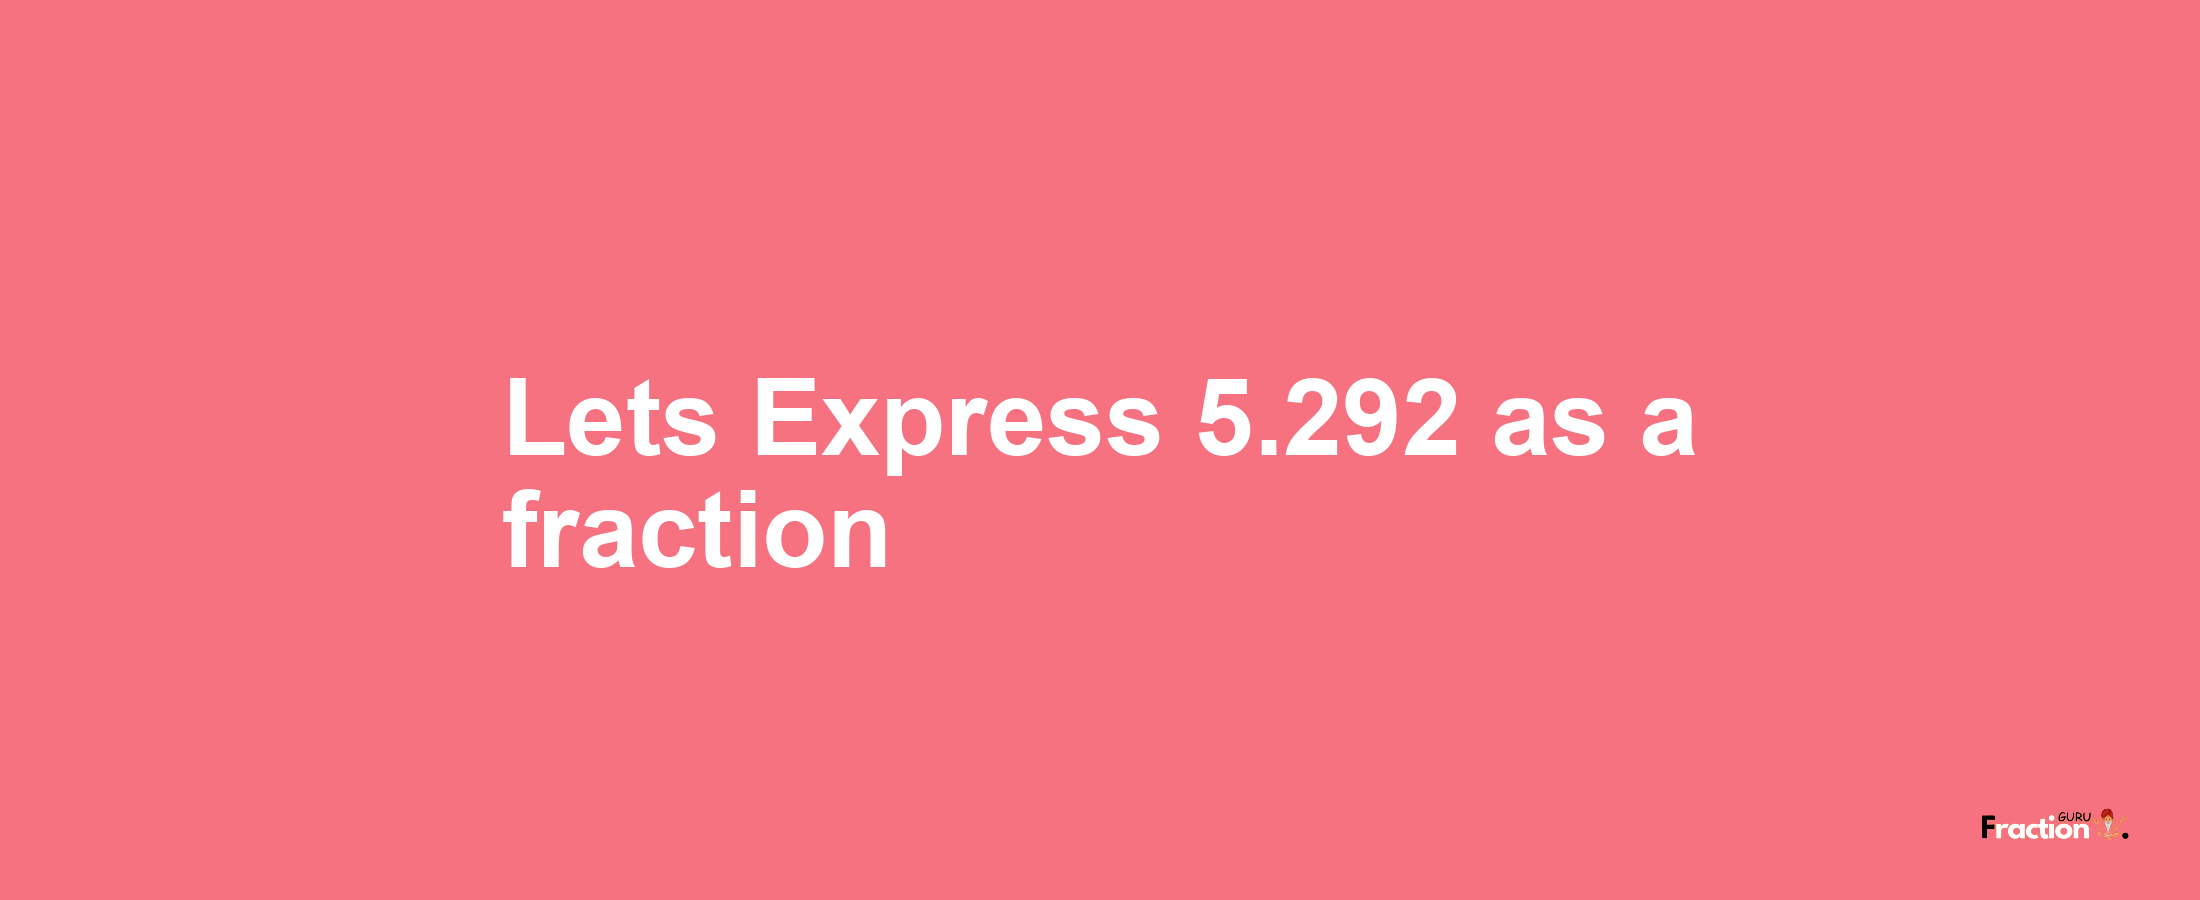 Lets Express 5.292 as afraction